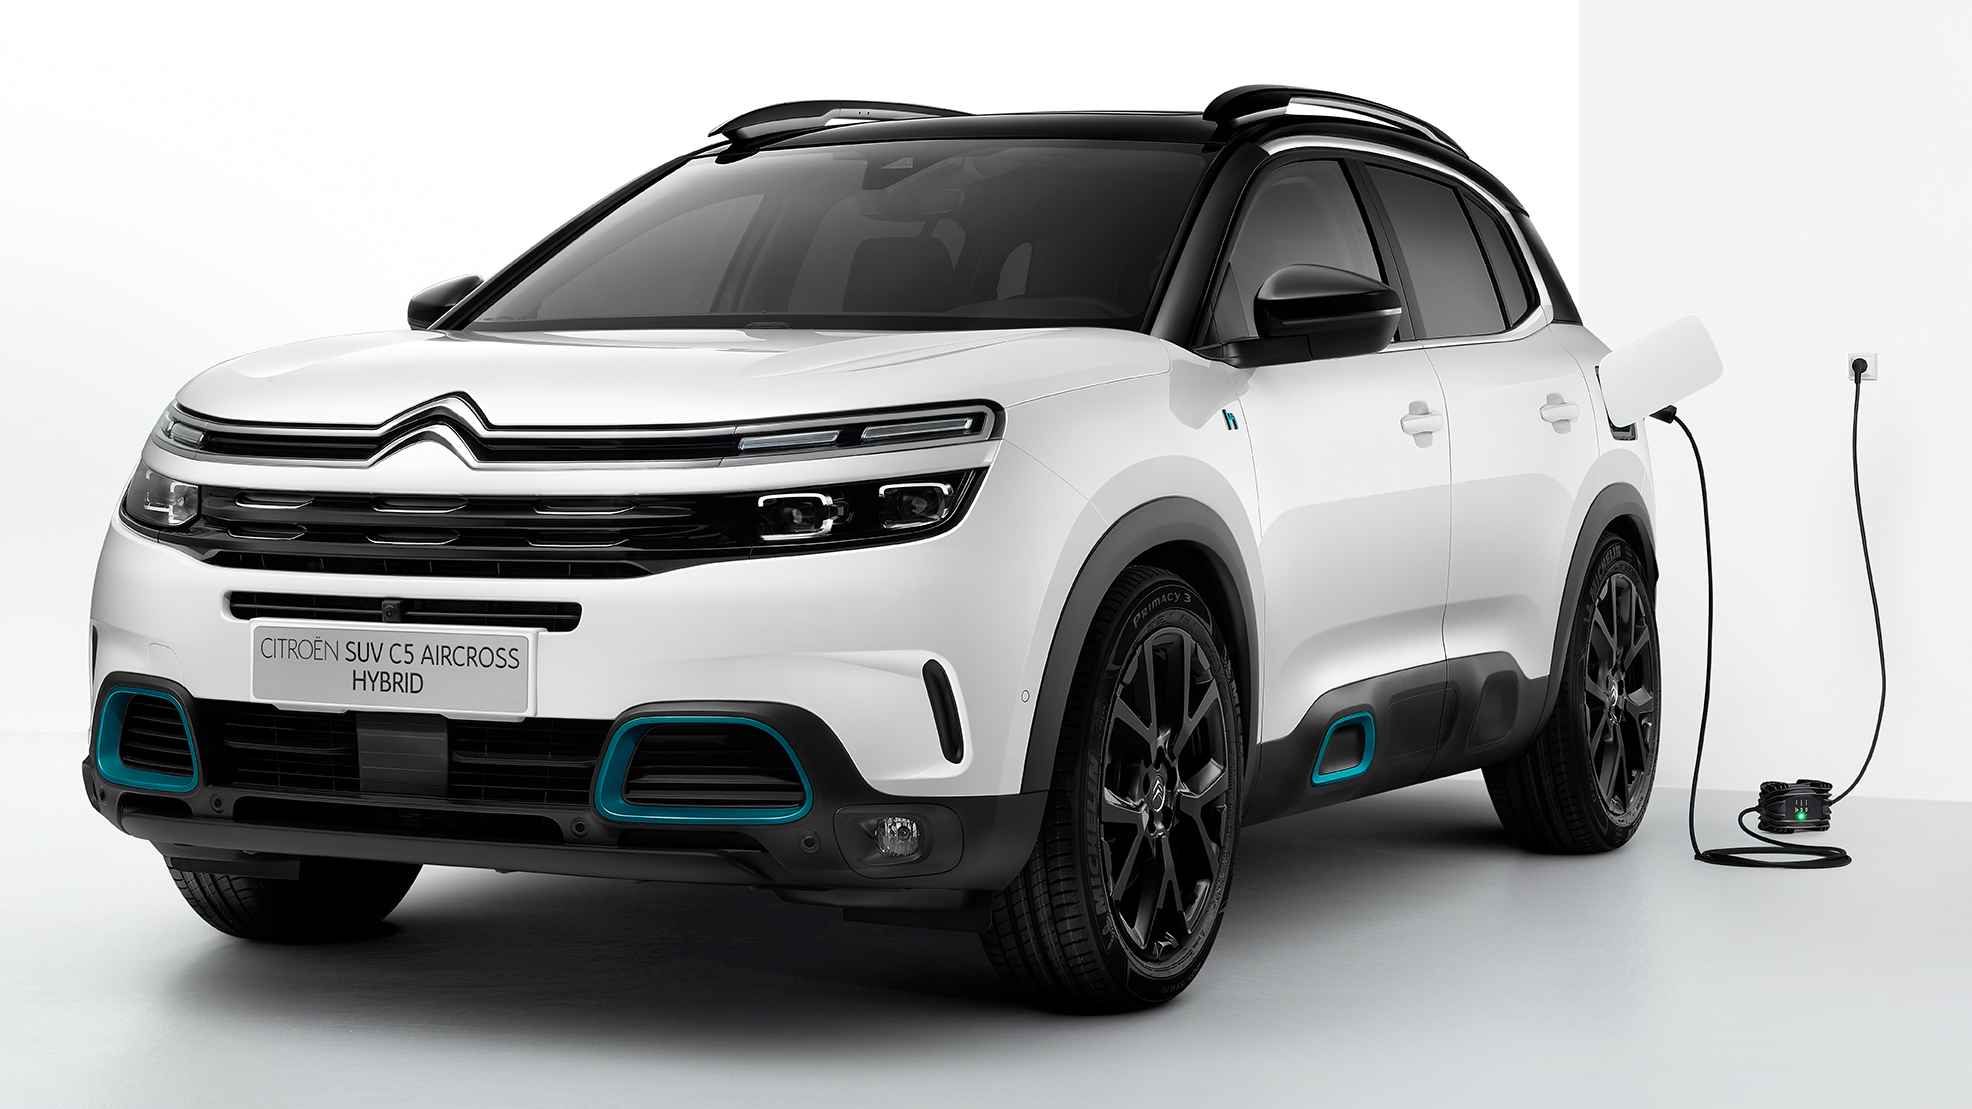  Citroen C5 Aircross Hybrid won’t be launched in India anytime soon. Here’s why